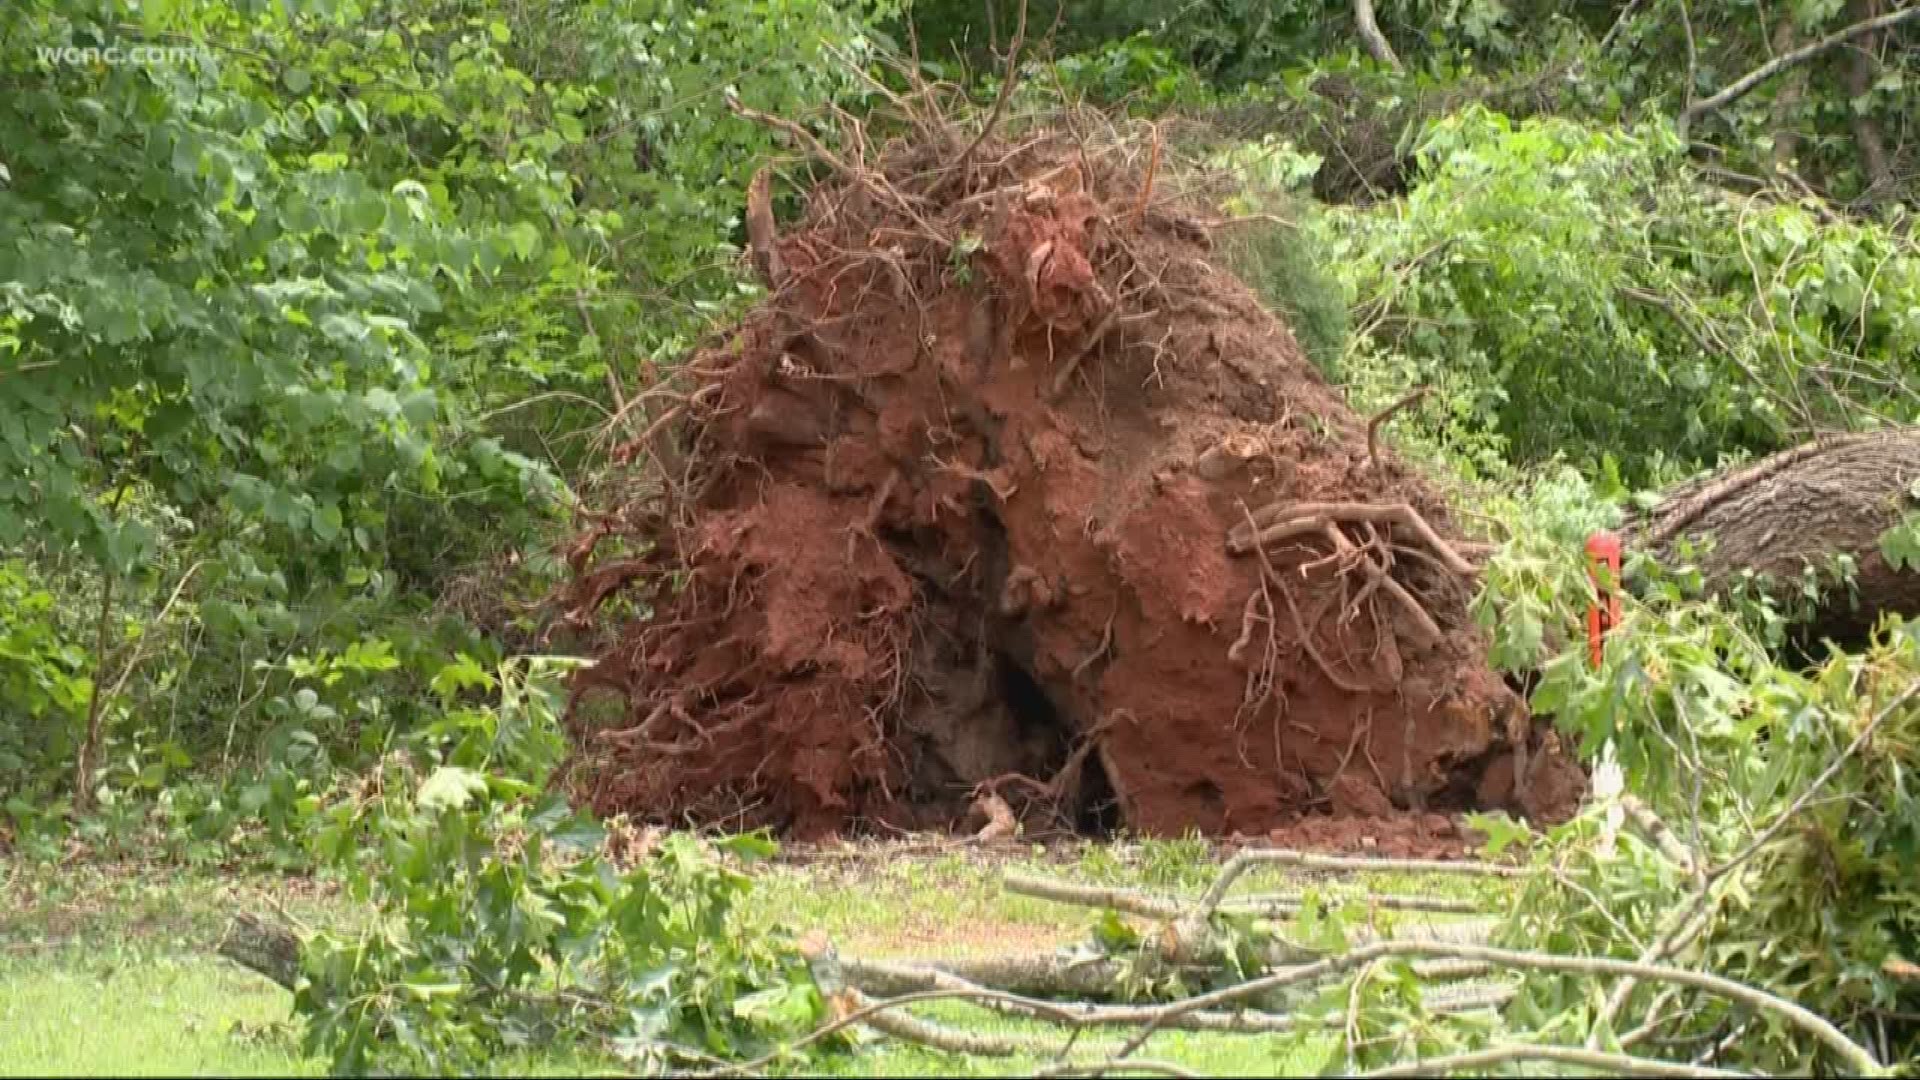 Strong storms ripped through York County Wednesday night leaving a path of damage behind.